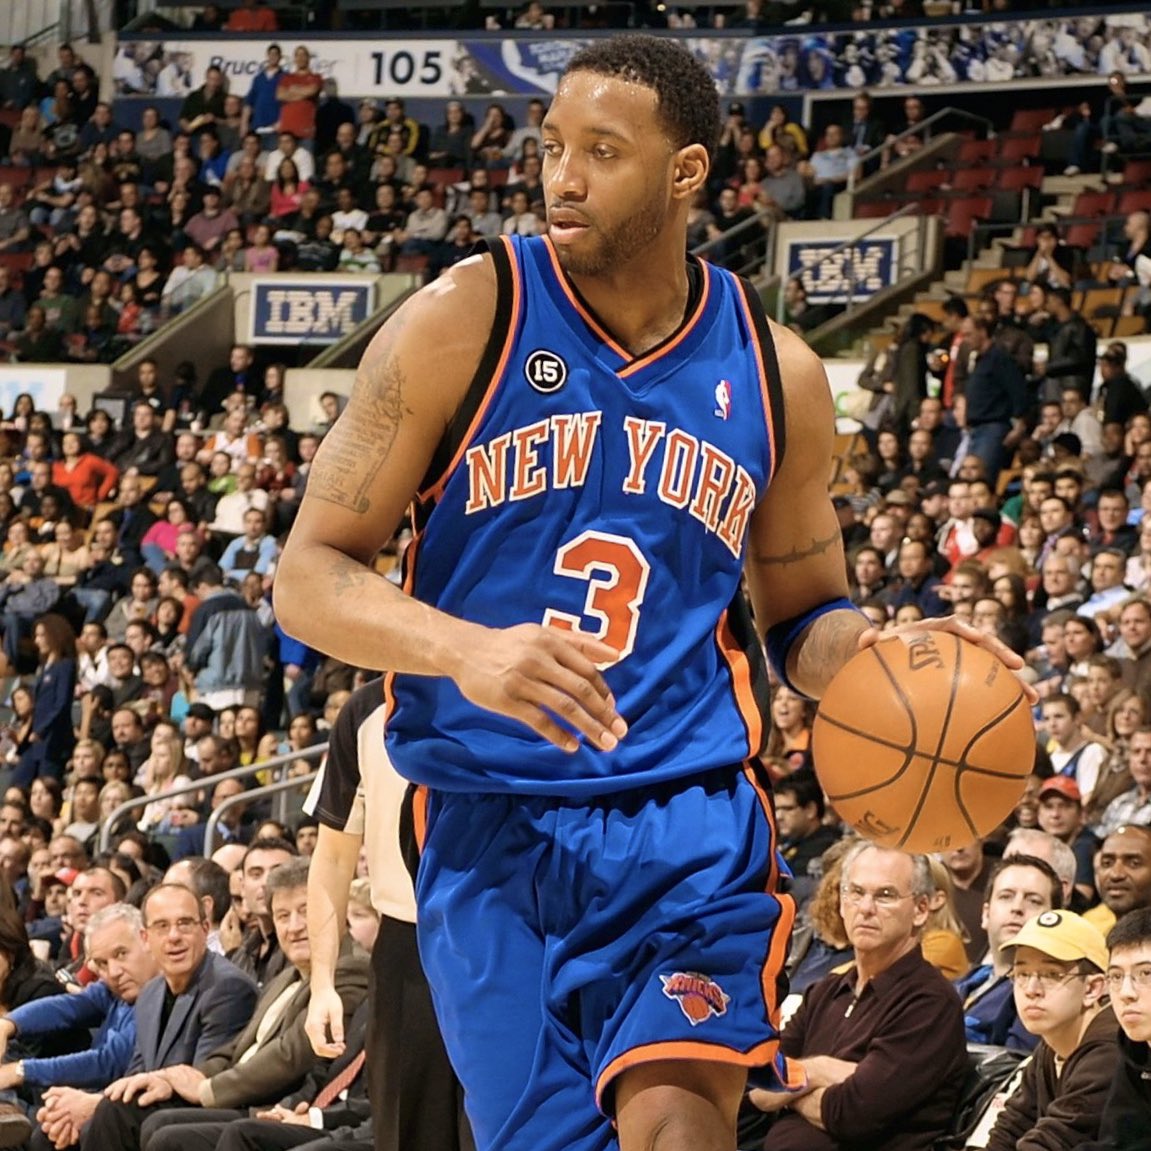 Tracy McGrady of the New York Knicks, 2010.T-Mac averaged 9.4 points, 3.9 assists & 3.7 rebounds in 24 games with the Knicks.